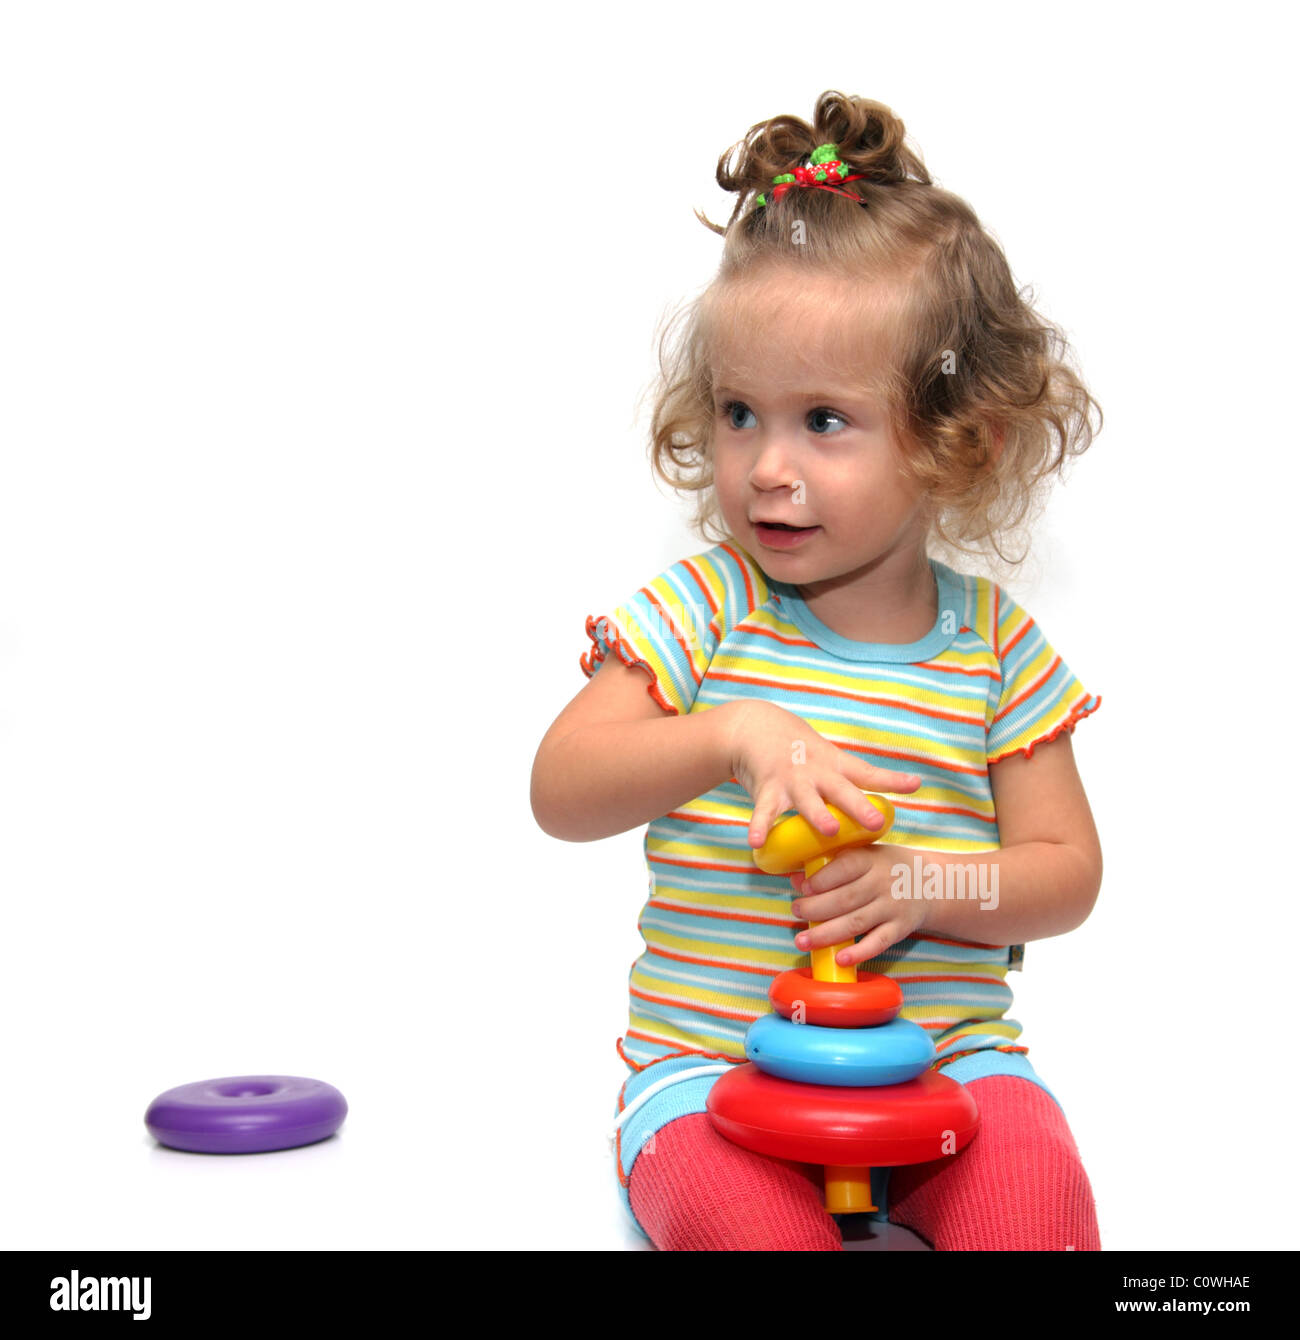 cute little girl playing with pyramid on white Stock Photo - Alamy